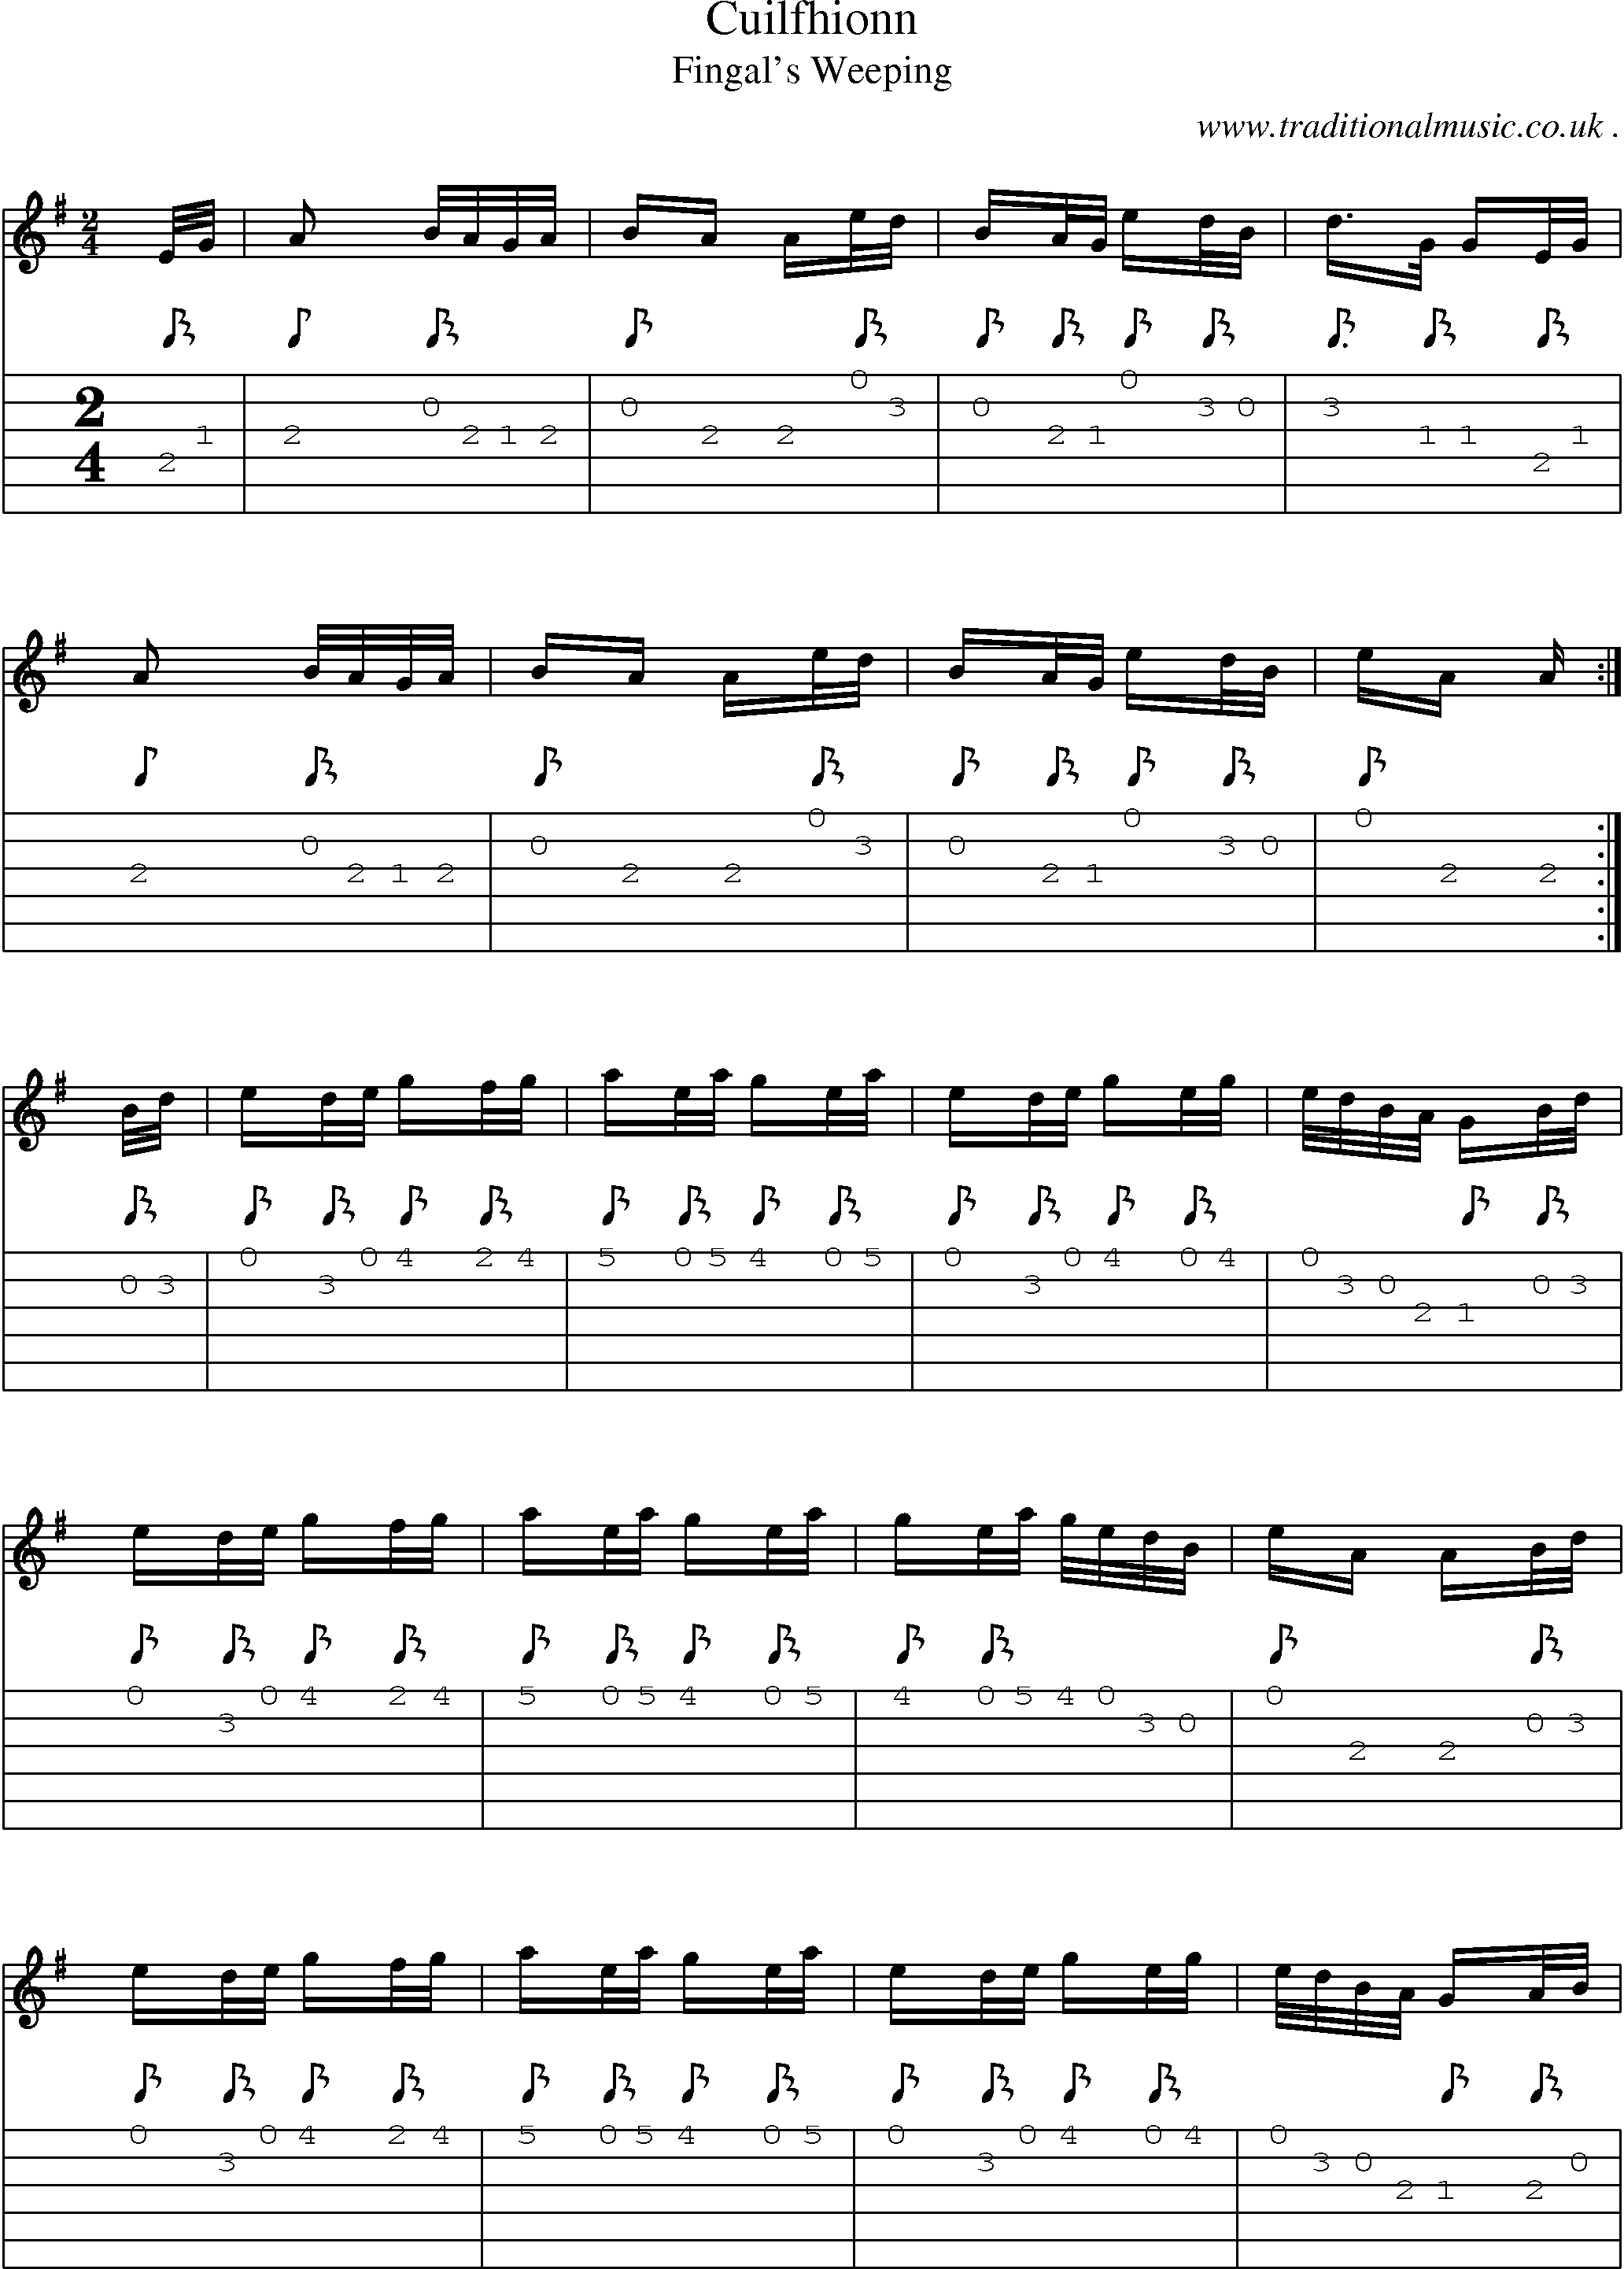 Sheet-music  score, Chords and Guitar Tabs for Cuilfhionn